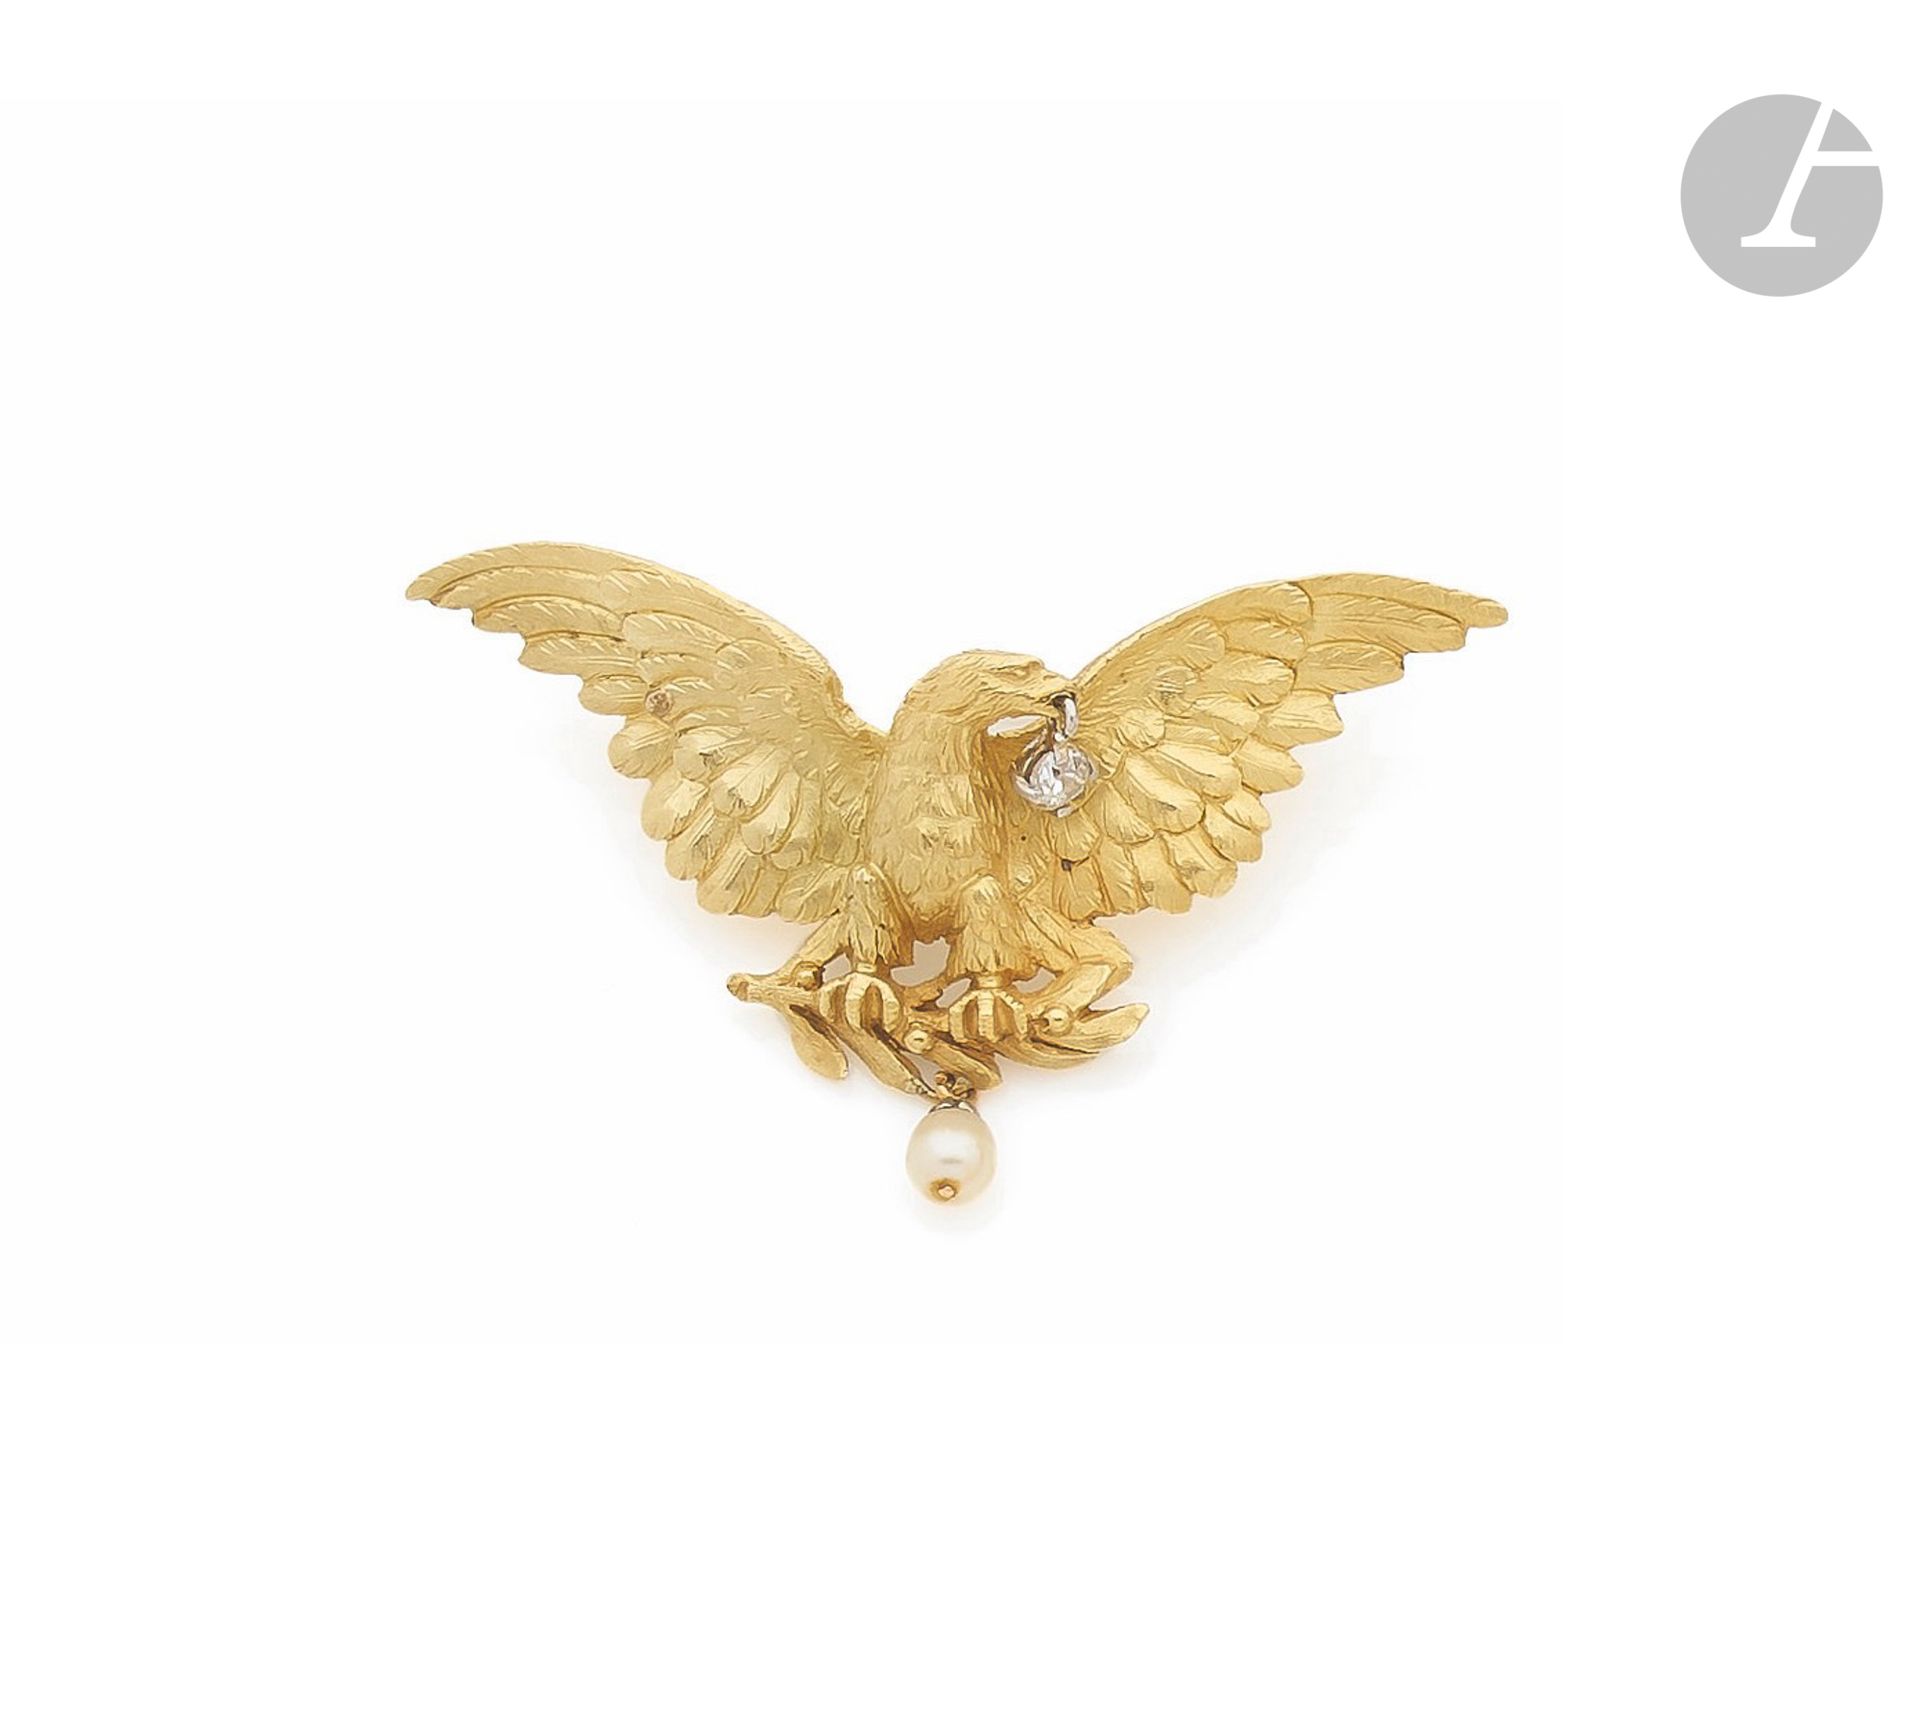 Null 18K (750) gold pendant brooch depicting an eagle, wings outstretched, holdi&hellip;